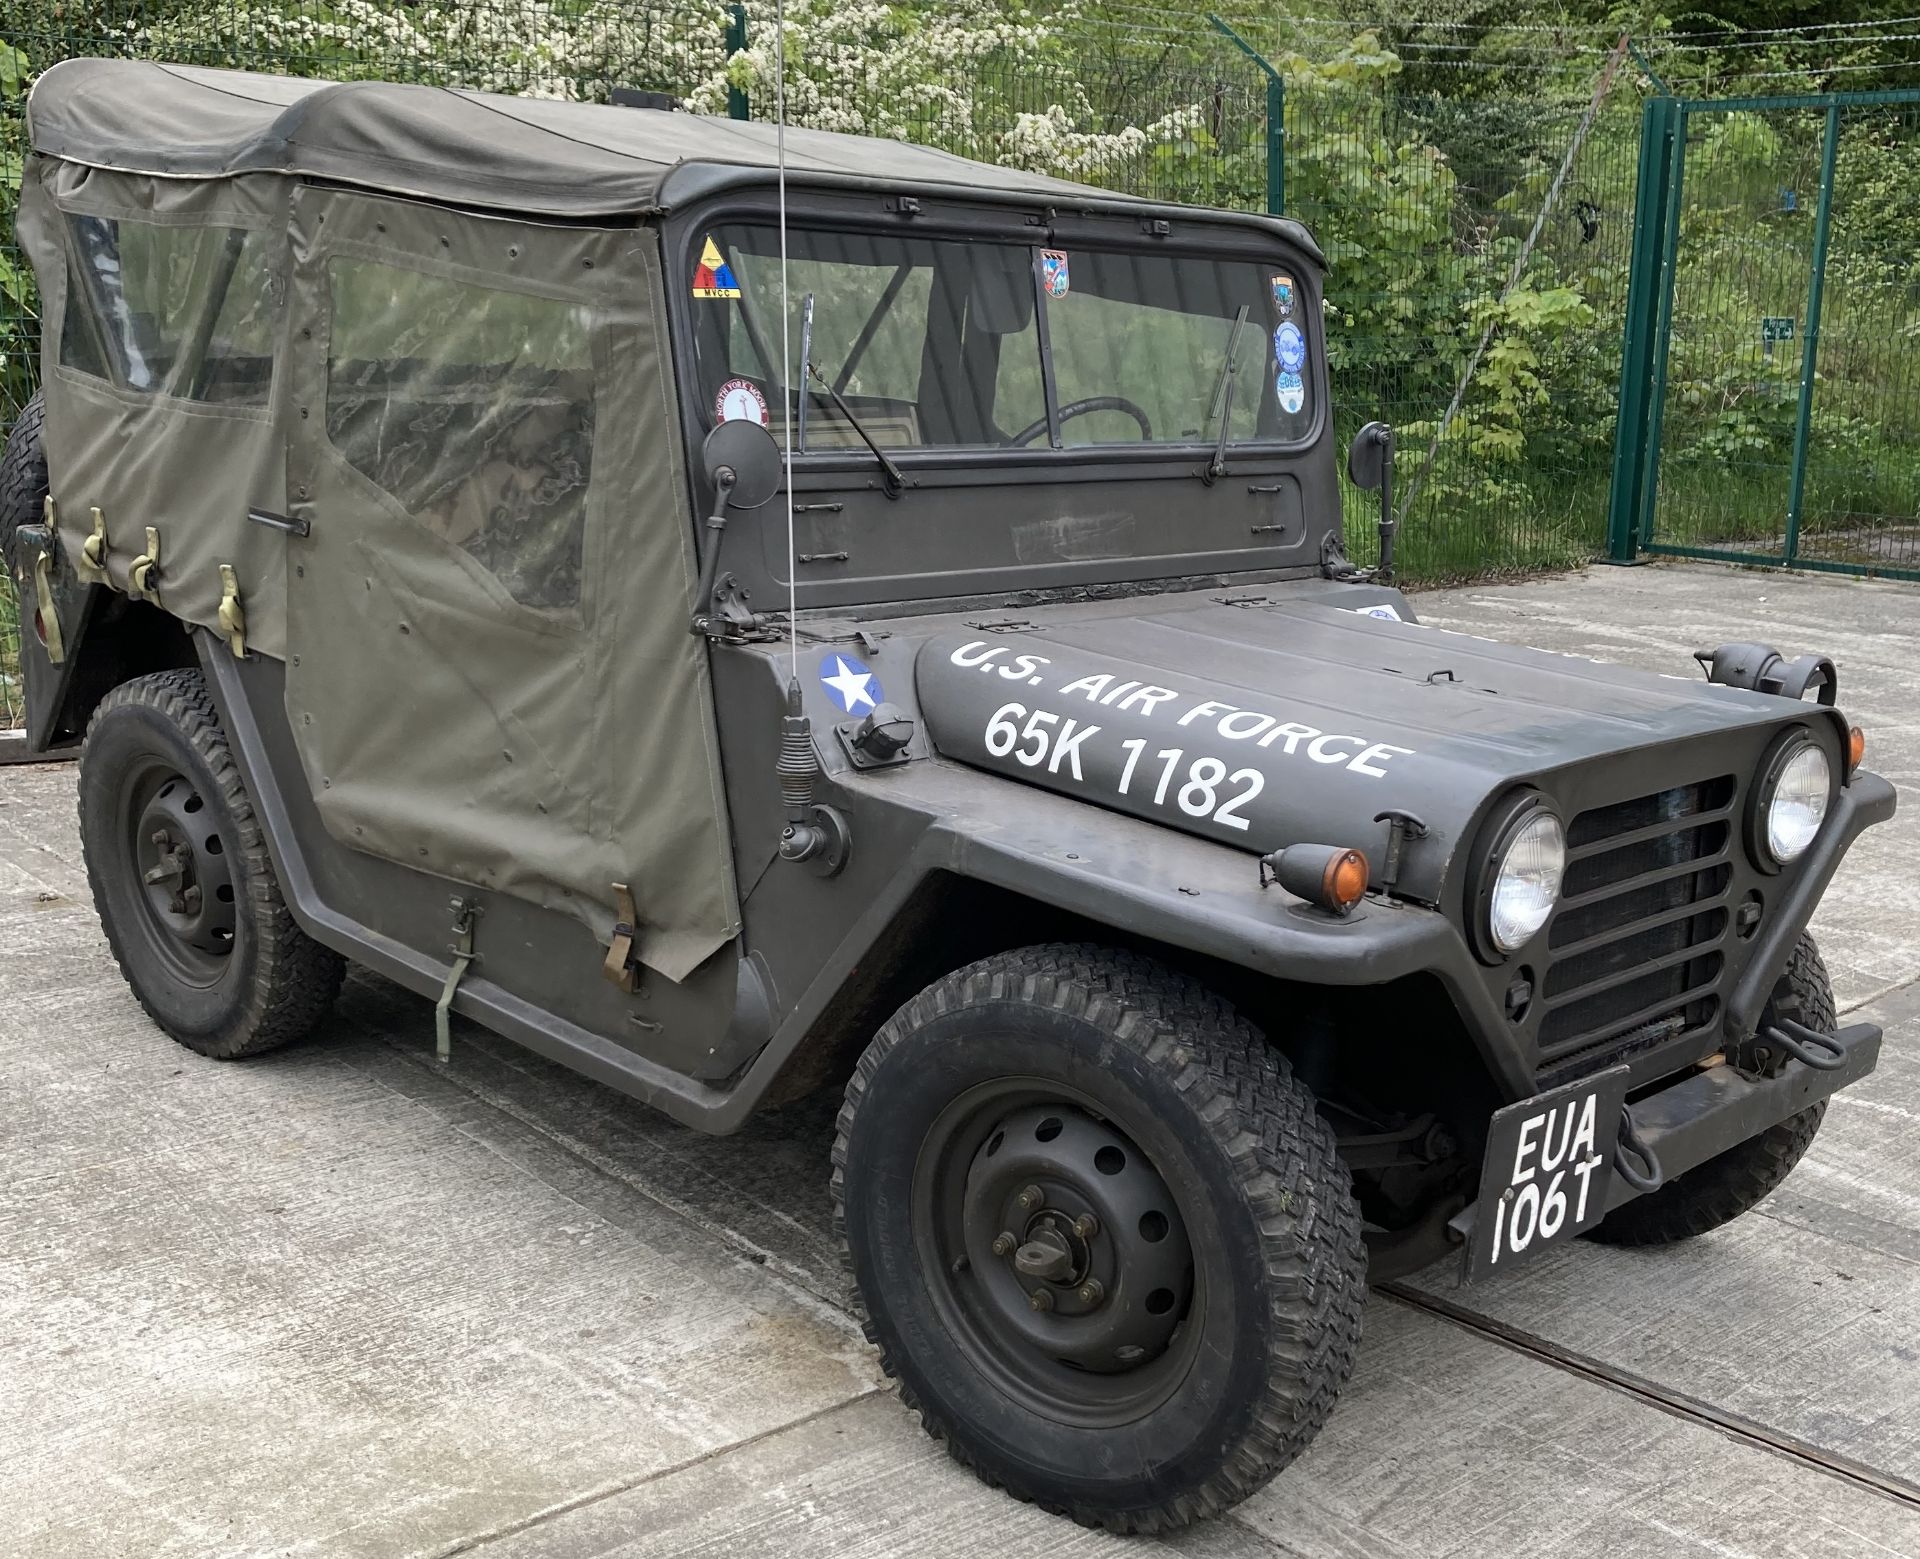 A FORD M151 (WILLYS) 1/4 TON 2.2 LIGHT 4X4 UTILITY JEEP - Petrol - Green - Ex USA Air Force. - Image 2 of 28